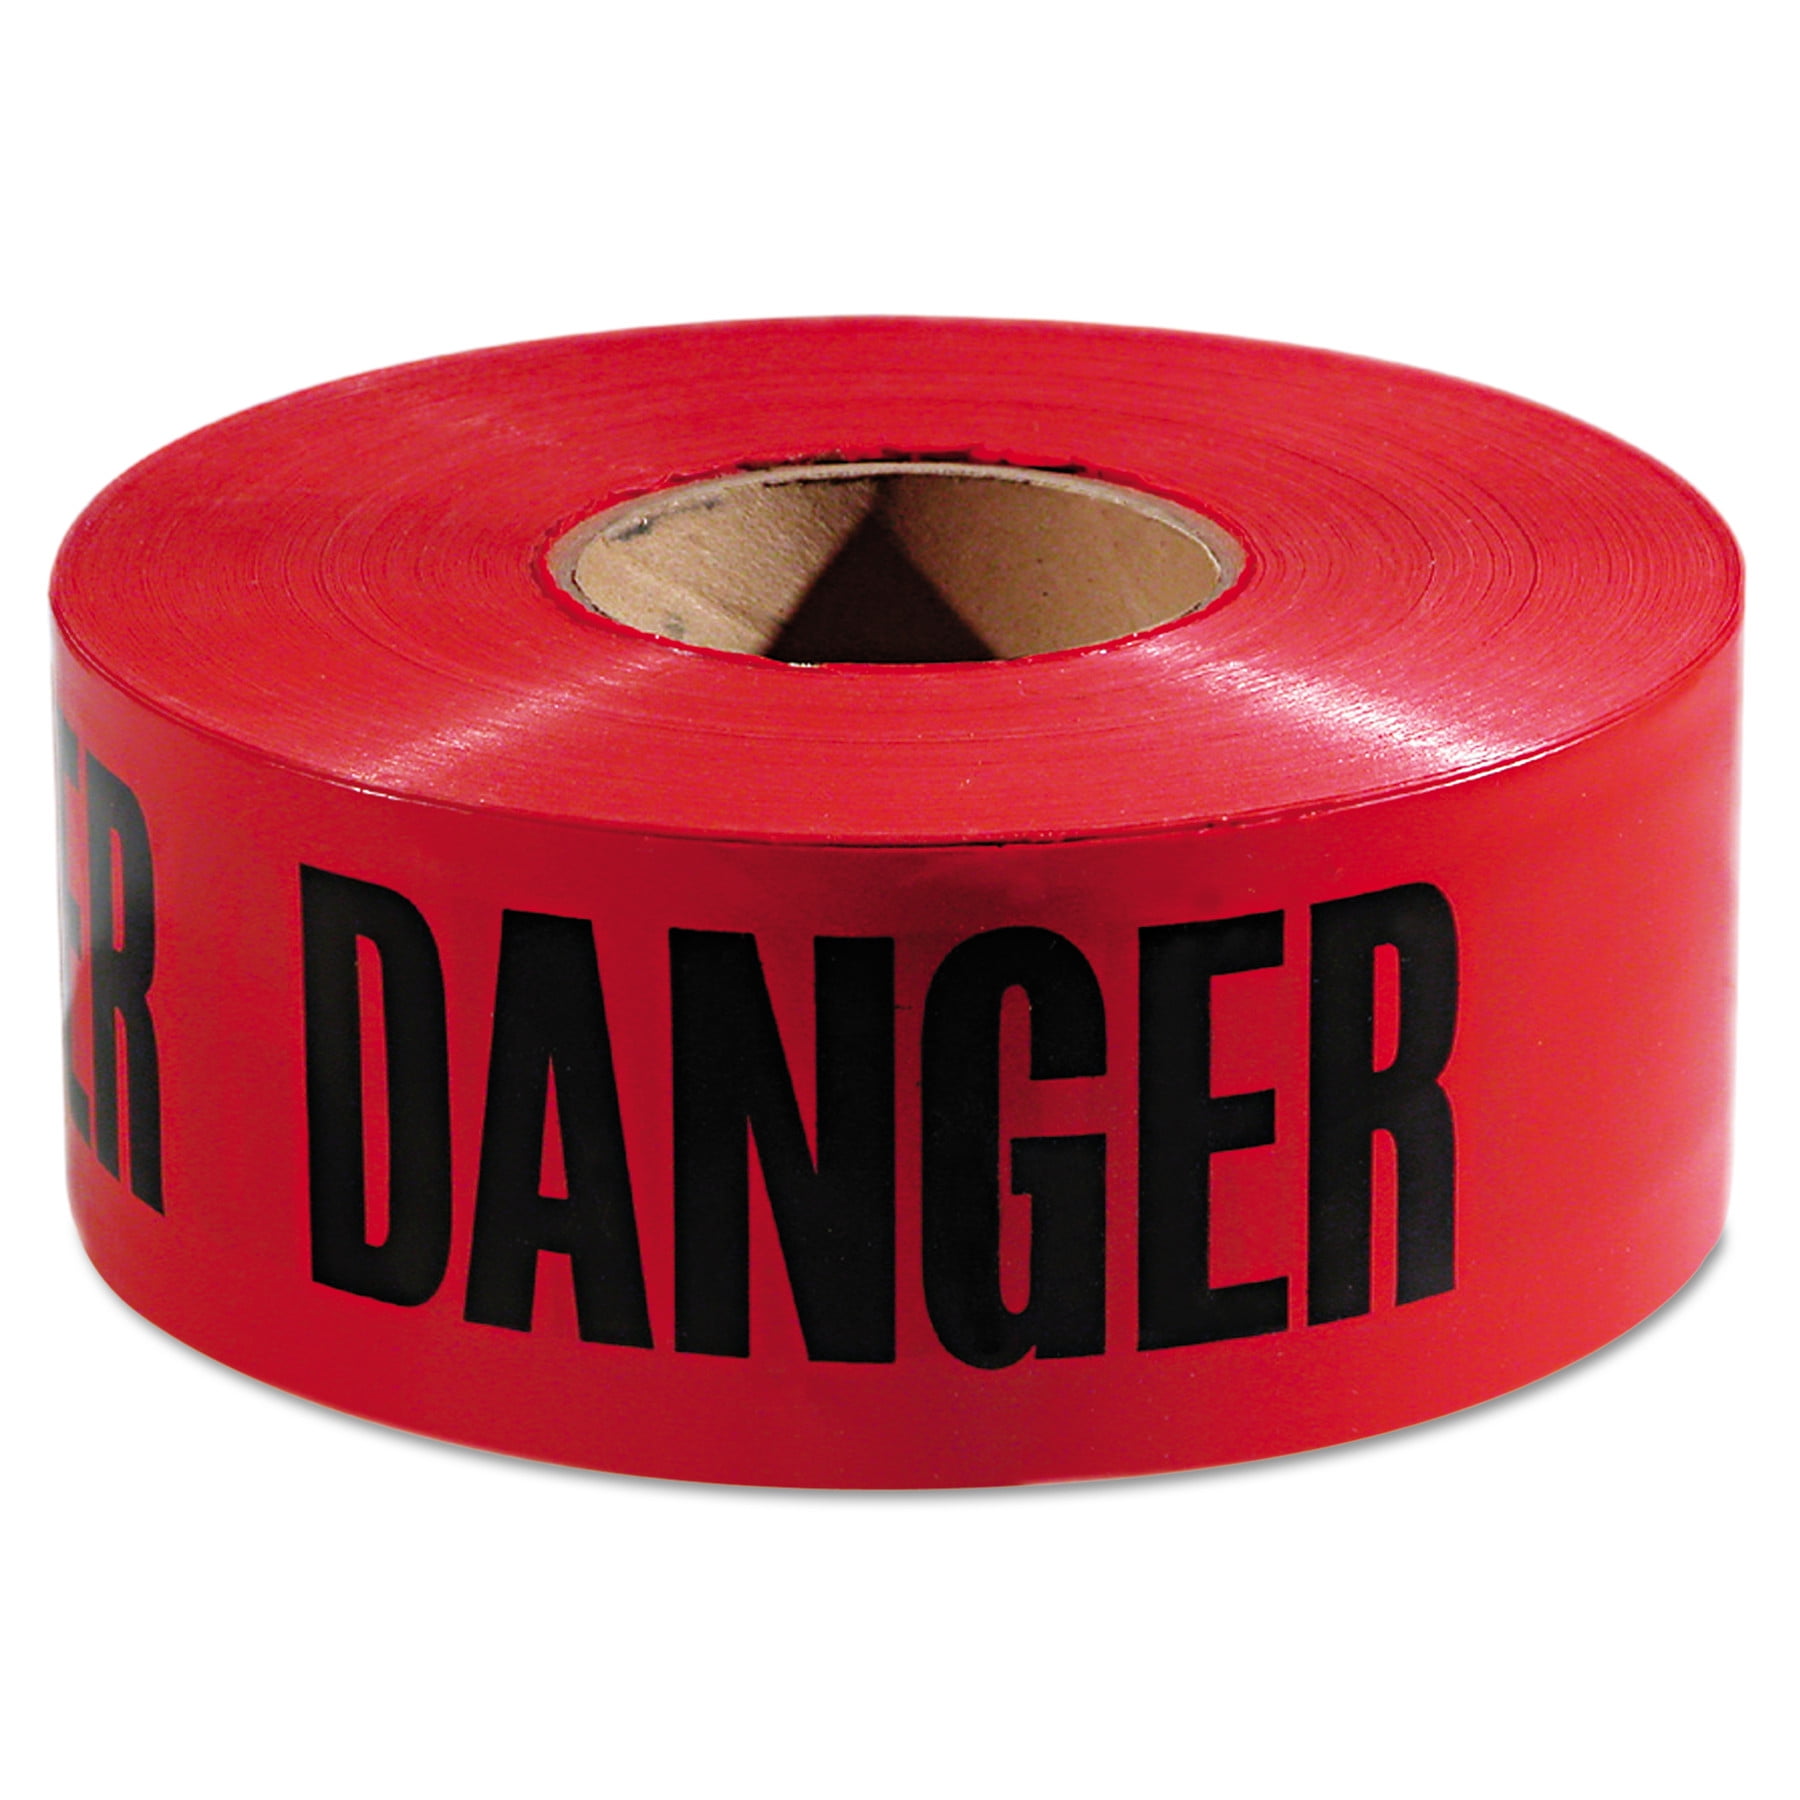 Details about   Empire Caution Standard Barricade Tape Cuidado Warning 3 Inch x 1000 Ft 12 Pack 